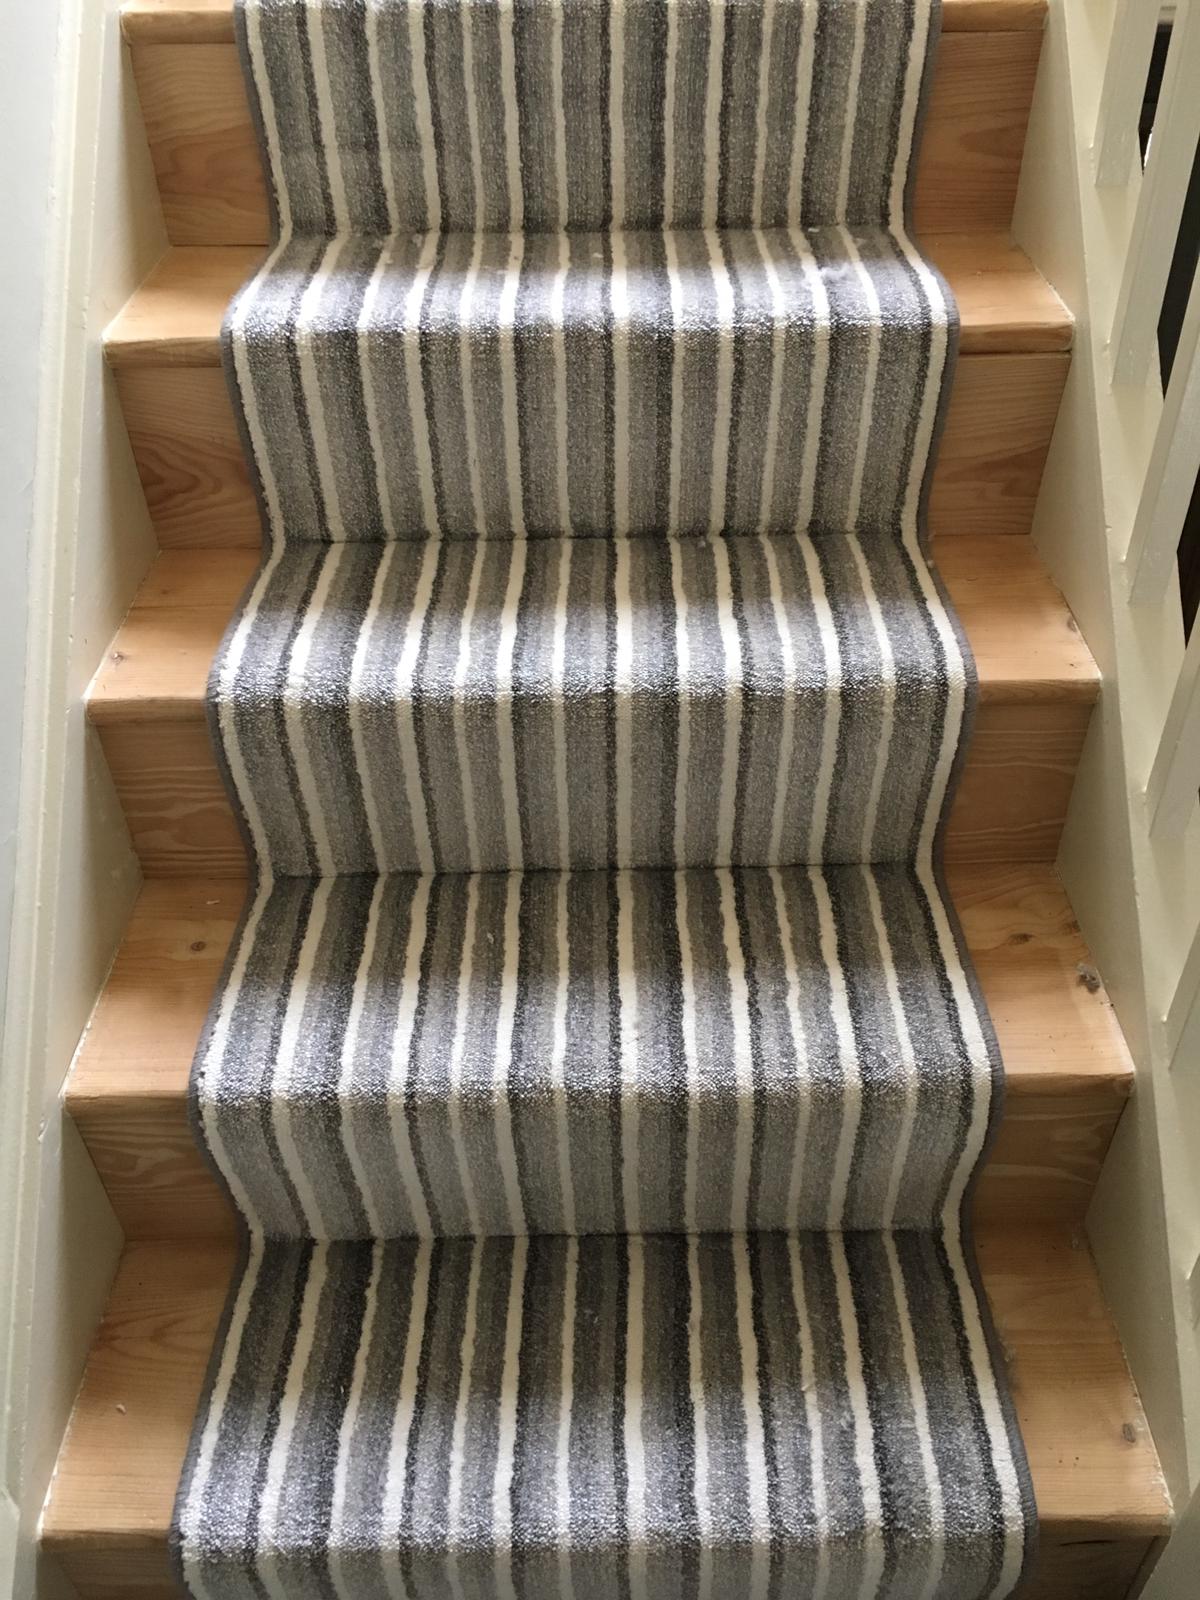 Details about   Dark Grey Twist Carpet Stair Runner with Whipped Edge 